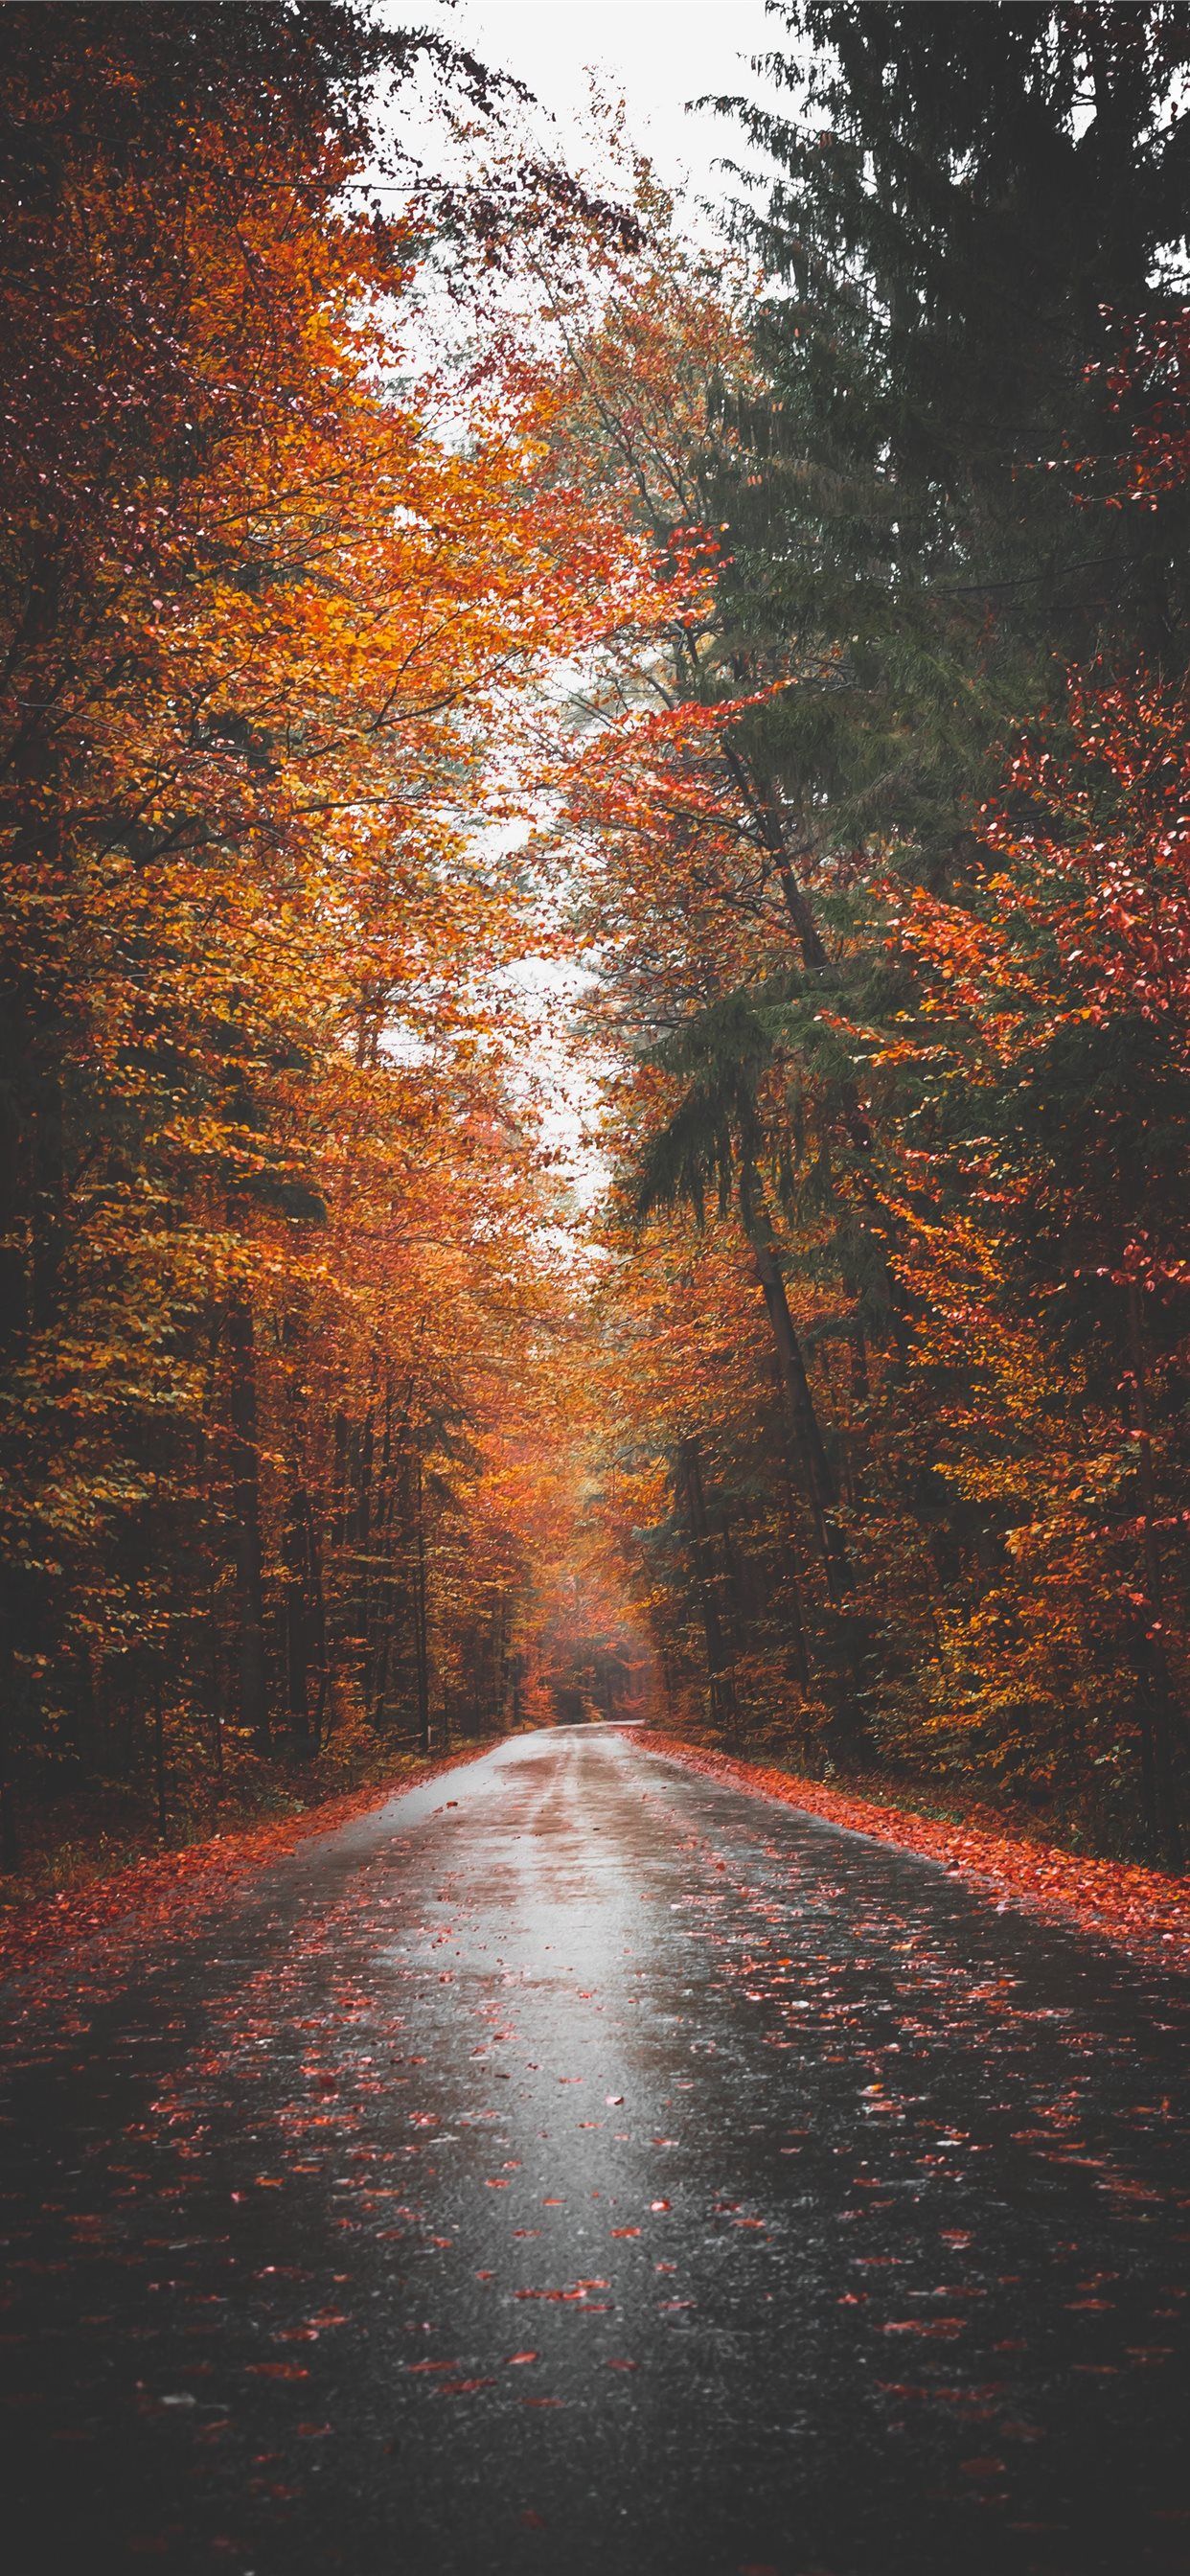 empty road surrounded by tree lines iPhone X Wallpaper Free Download